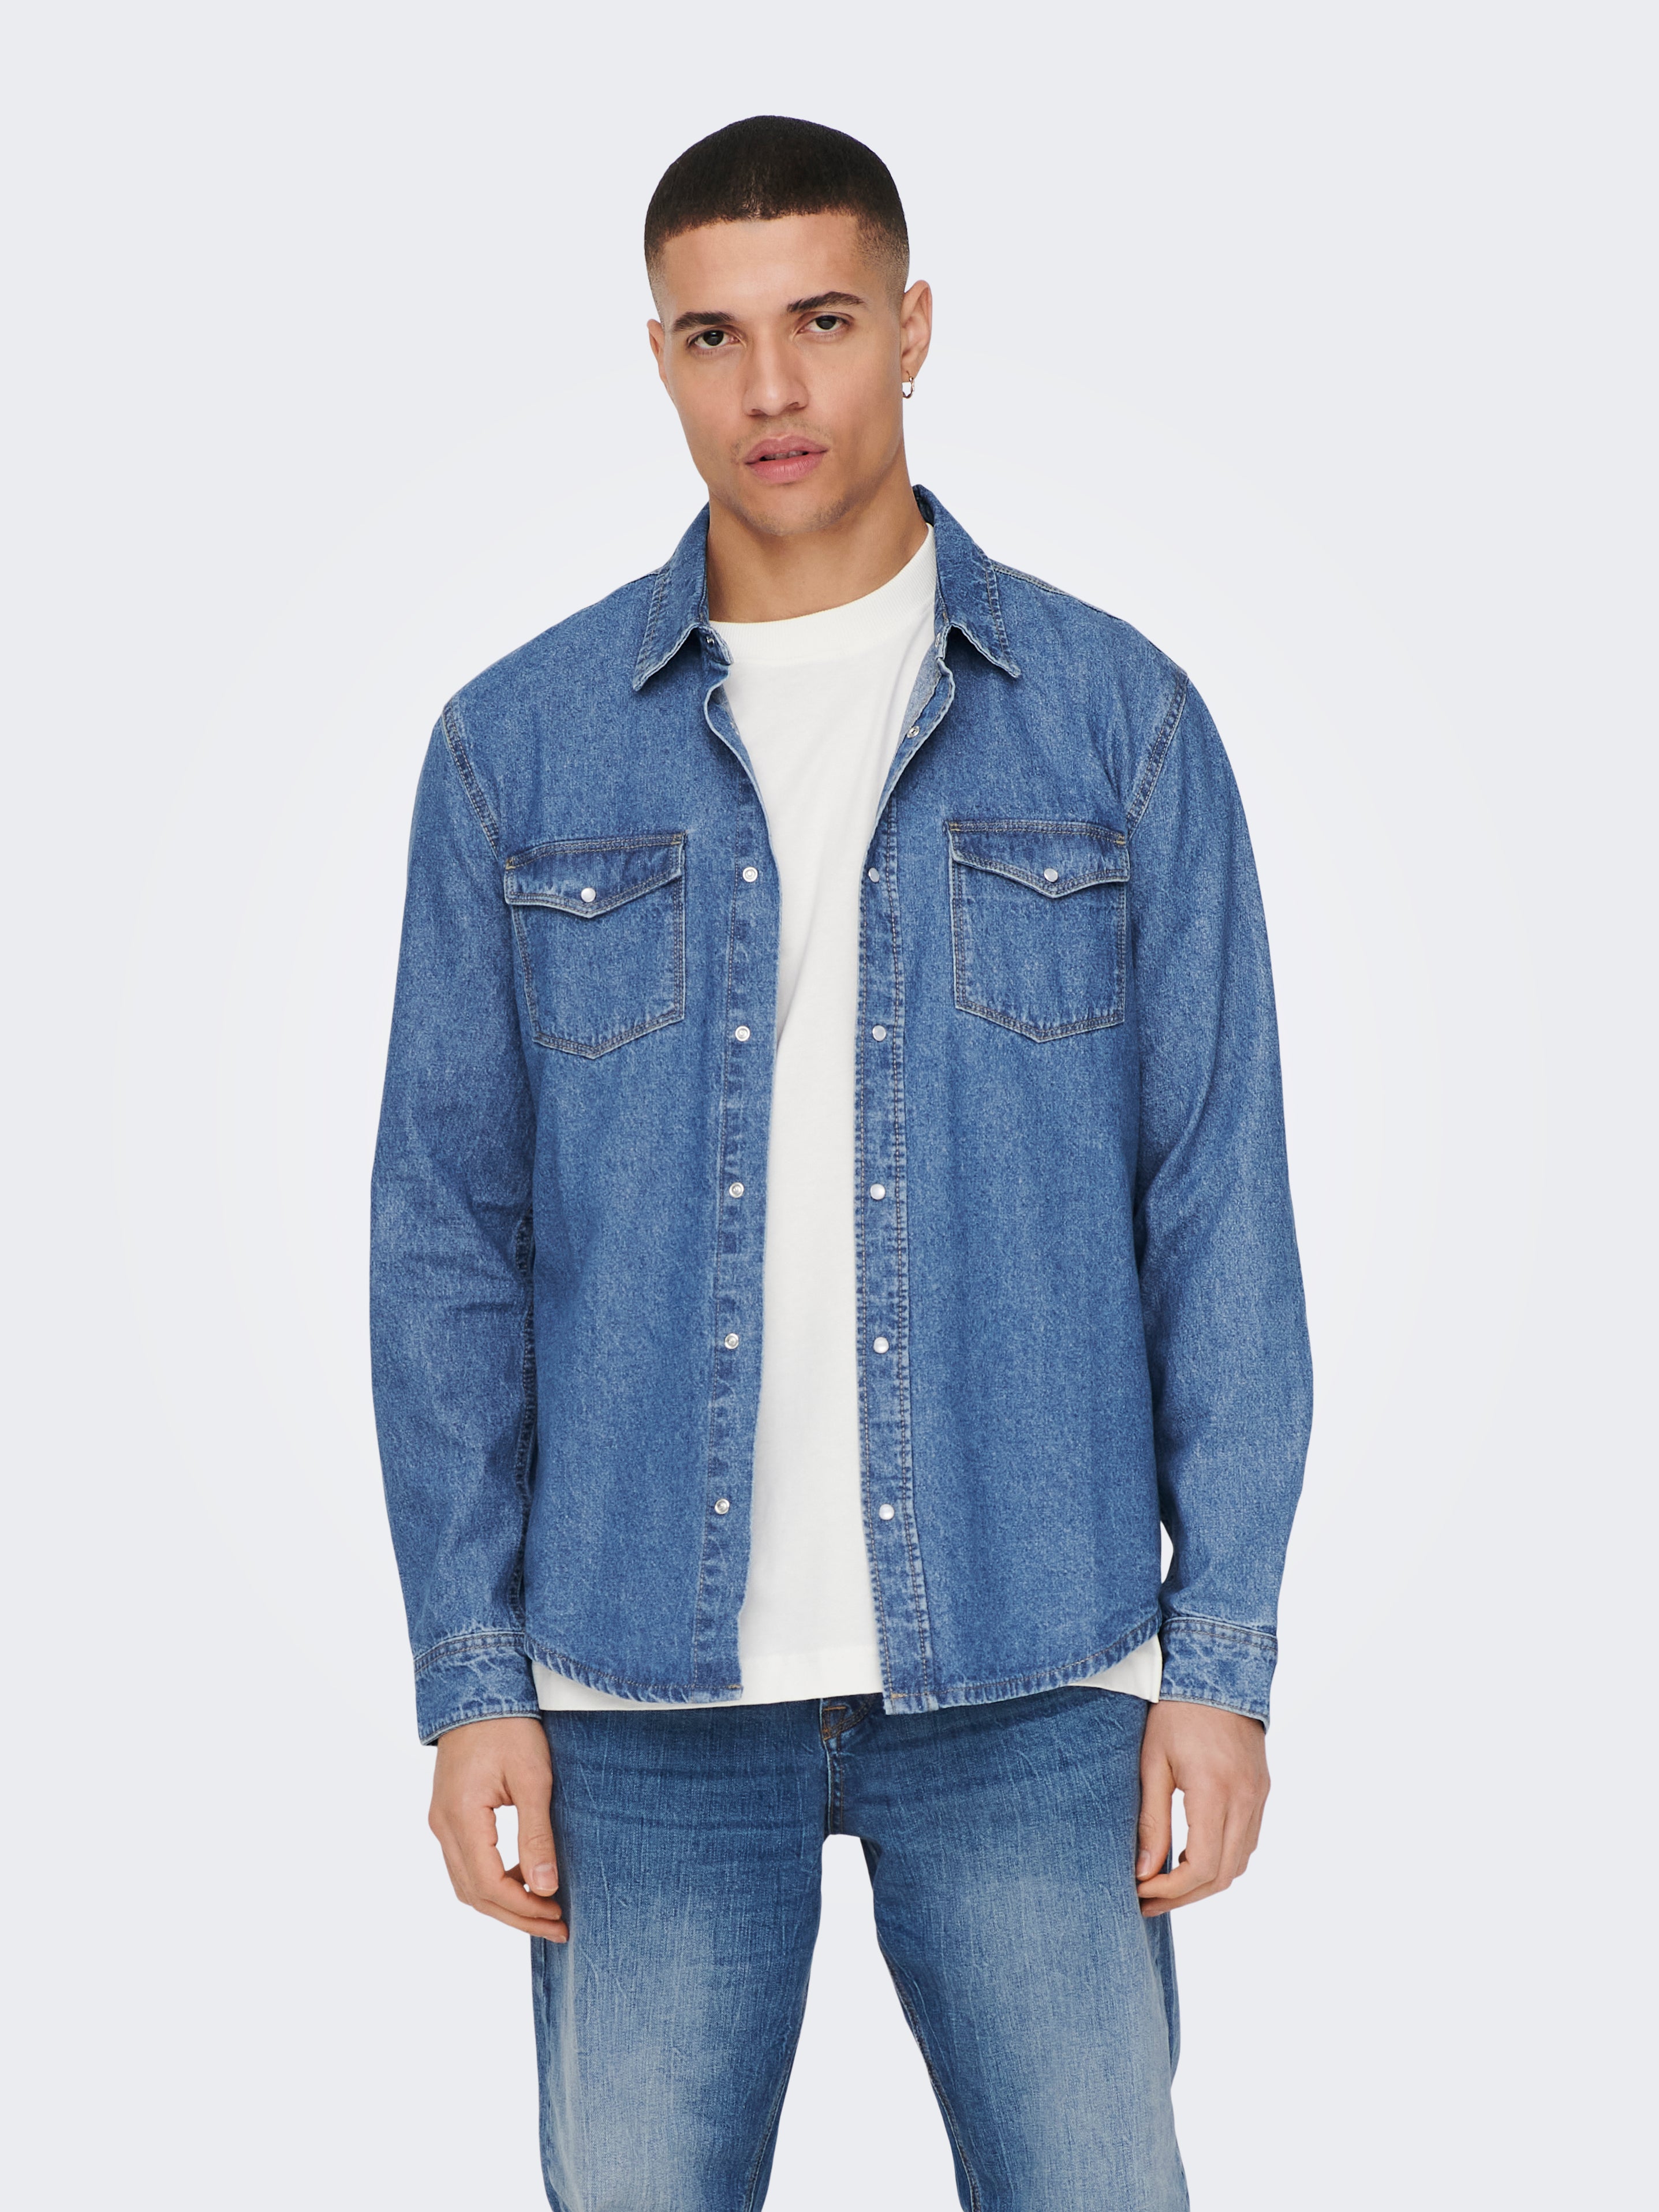 Denim shirt with chest pockets | Medium Blue | ONLY & SONS®